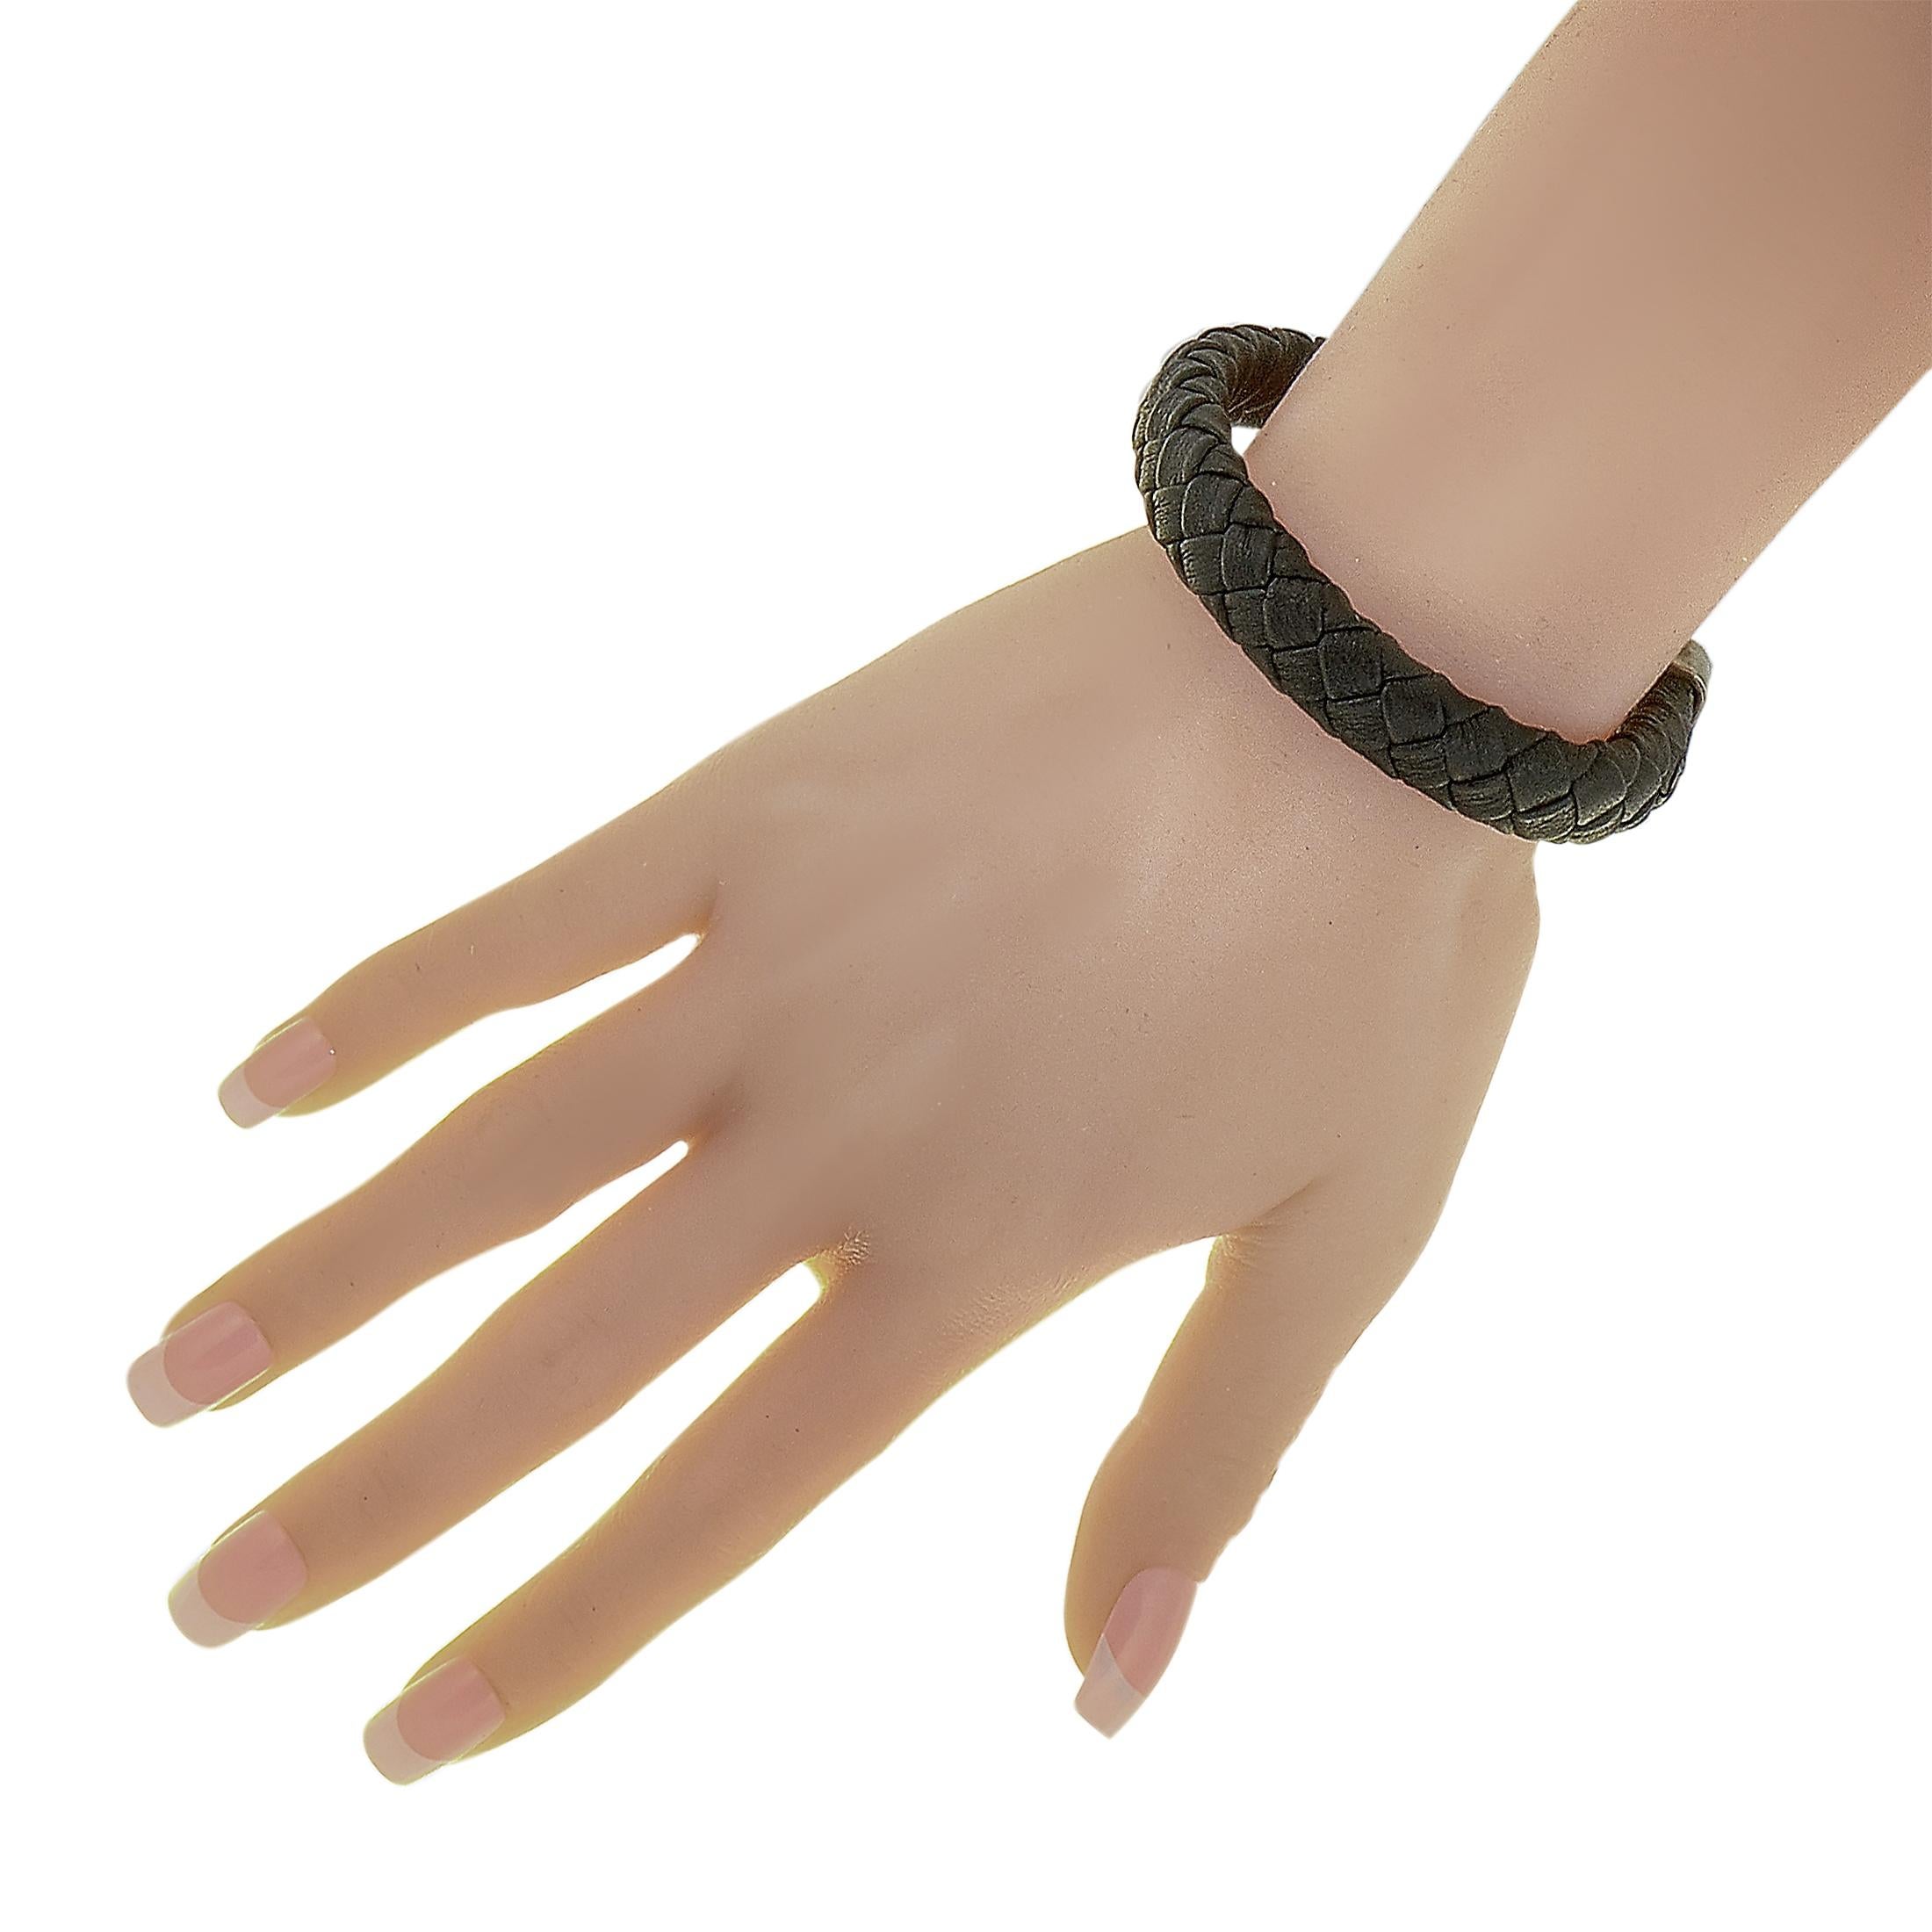 This King Baby bracelet is made out of sterling silver and black leather and weighs 29.3 grams, measuring 8.50” in length.

Offered in brand new condition, the bracelet includes the manufacturer’s pouch.